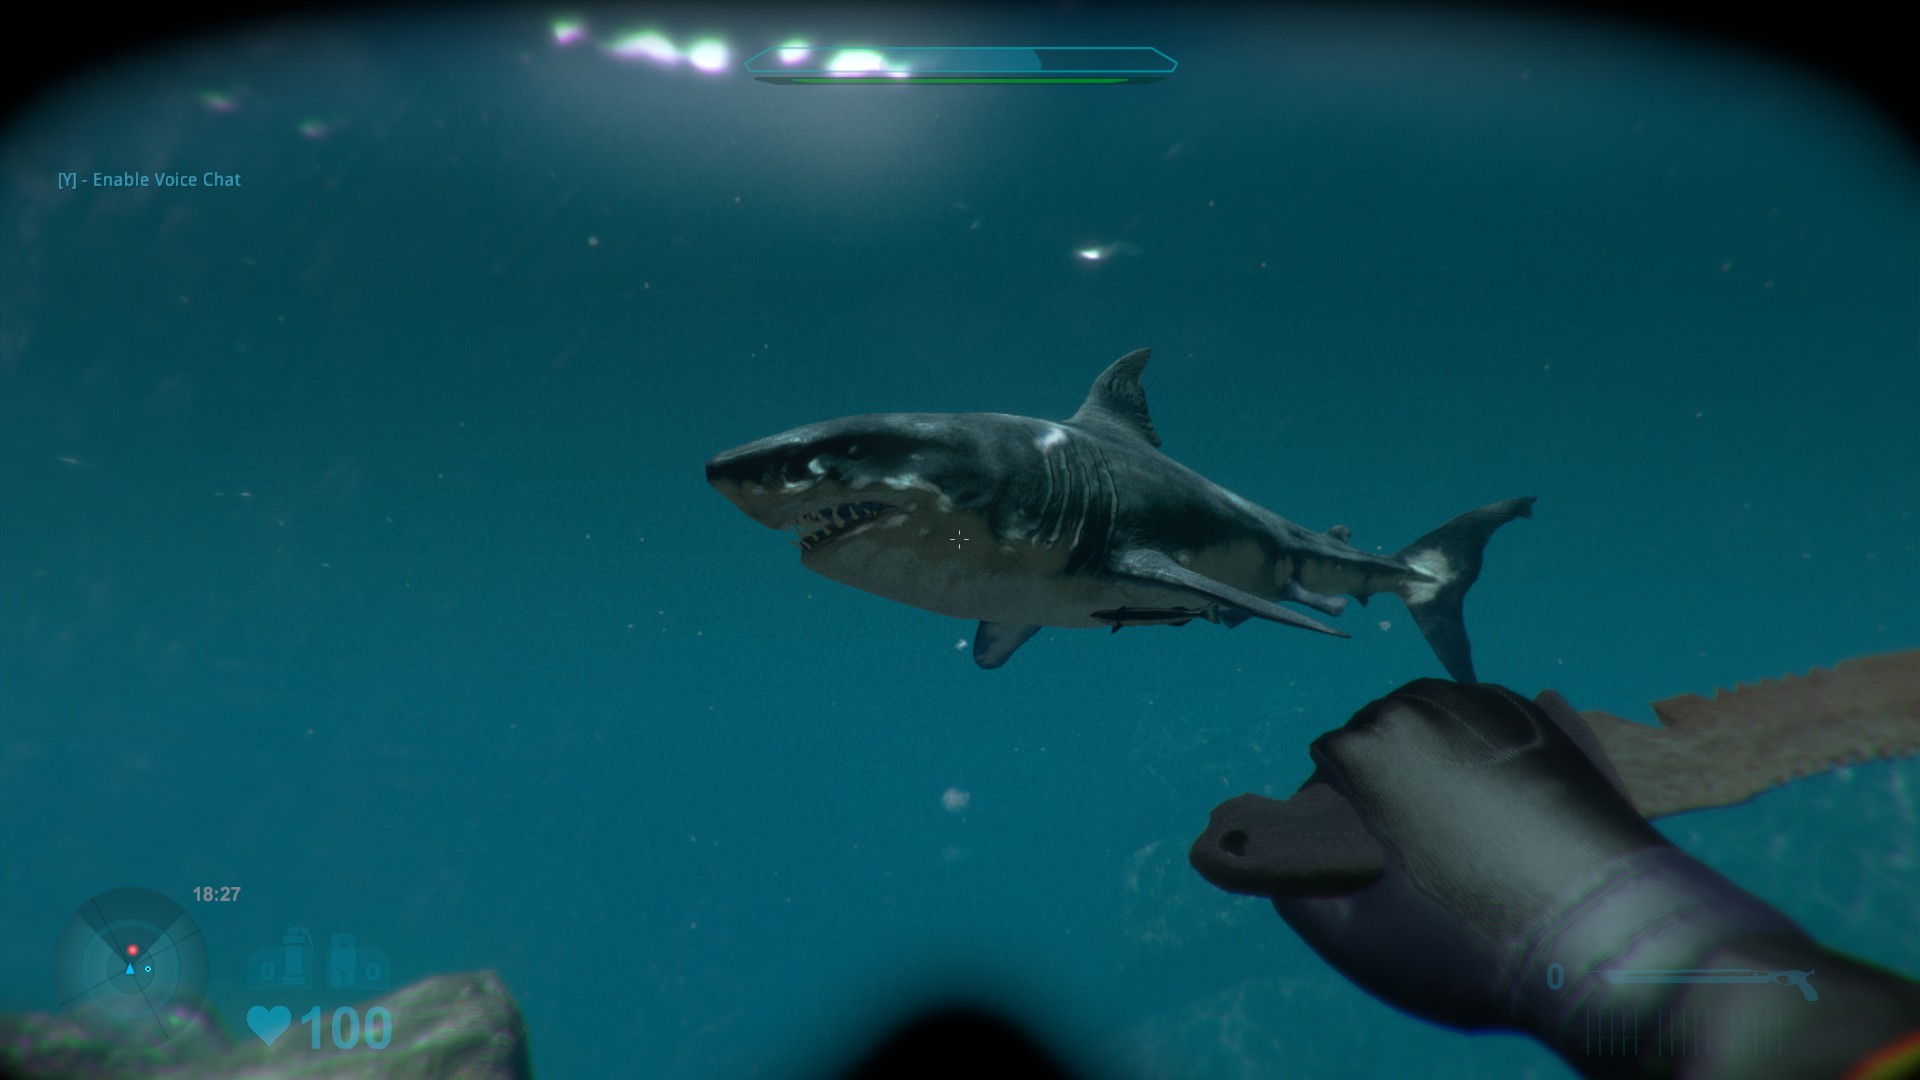 Double Head Shark Attack - SteamSpy - All the data and stats about Steam  games